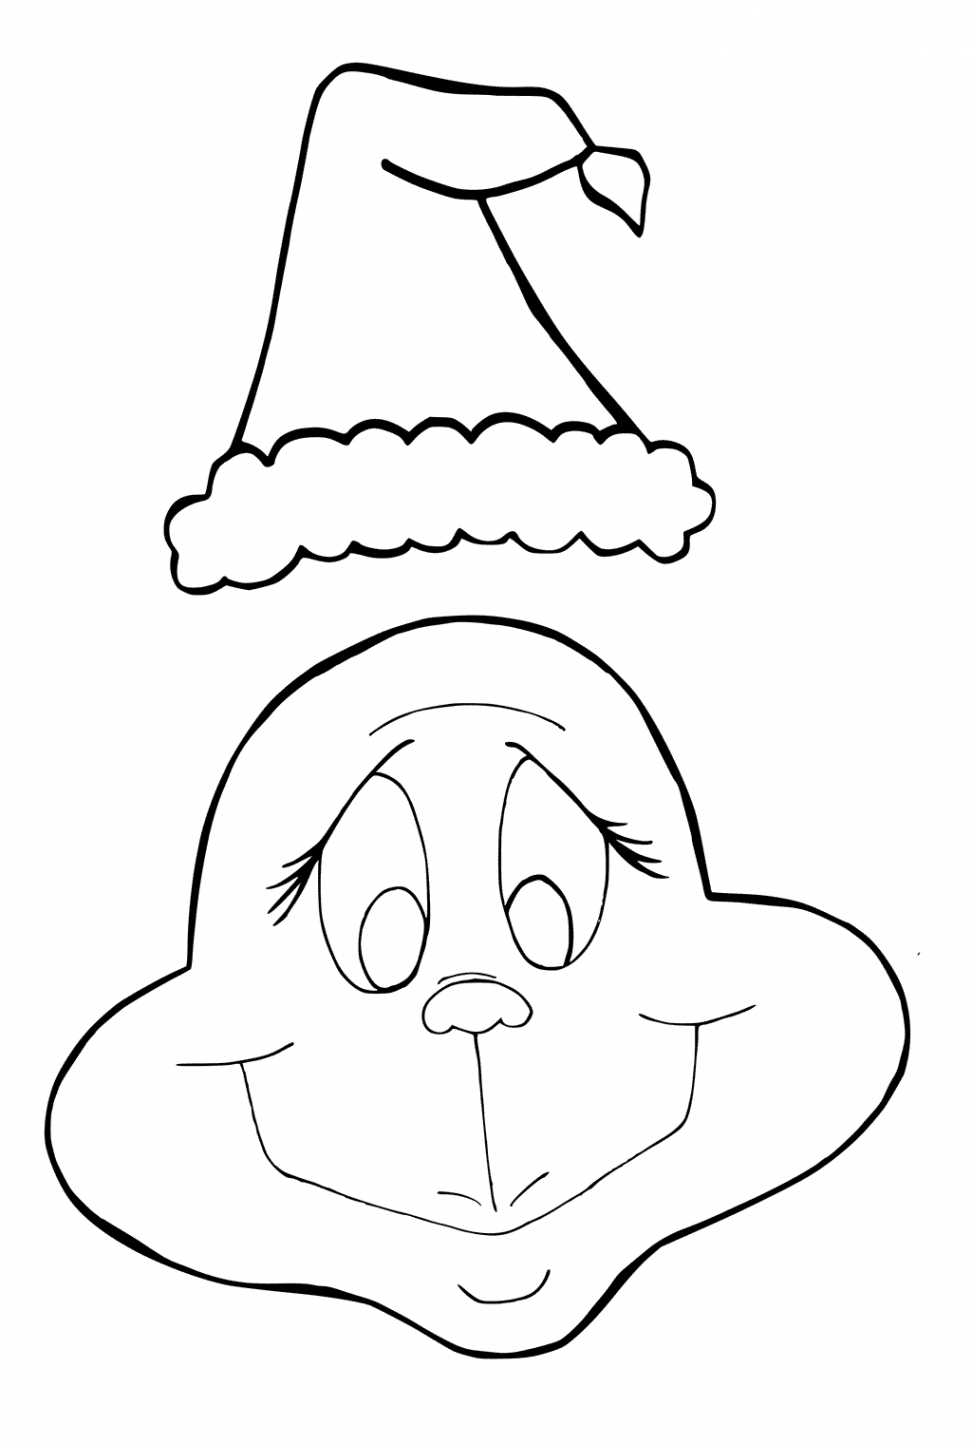 Grinch Coloring Pages - Free Printable Grinch  Grinch coloring